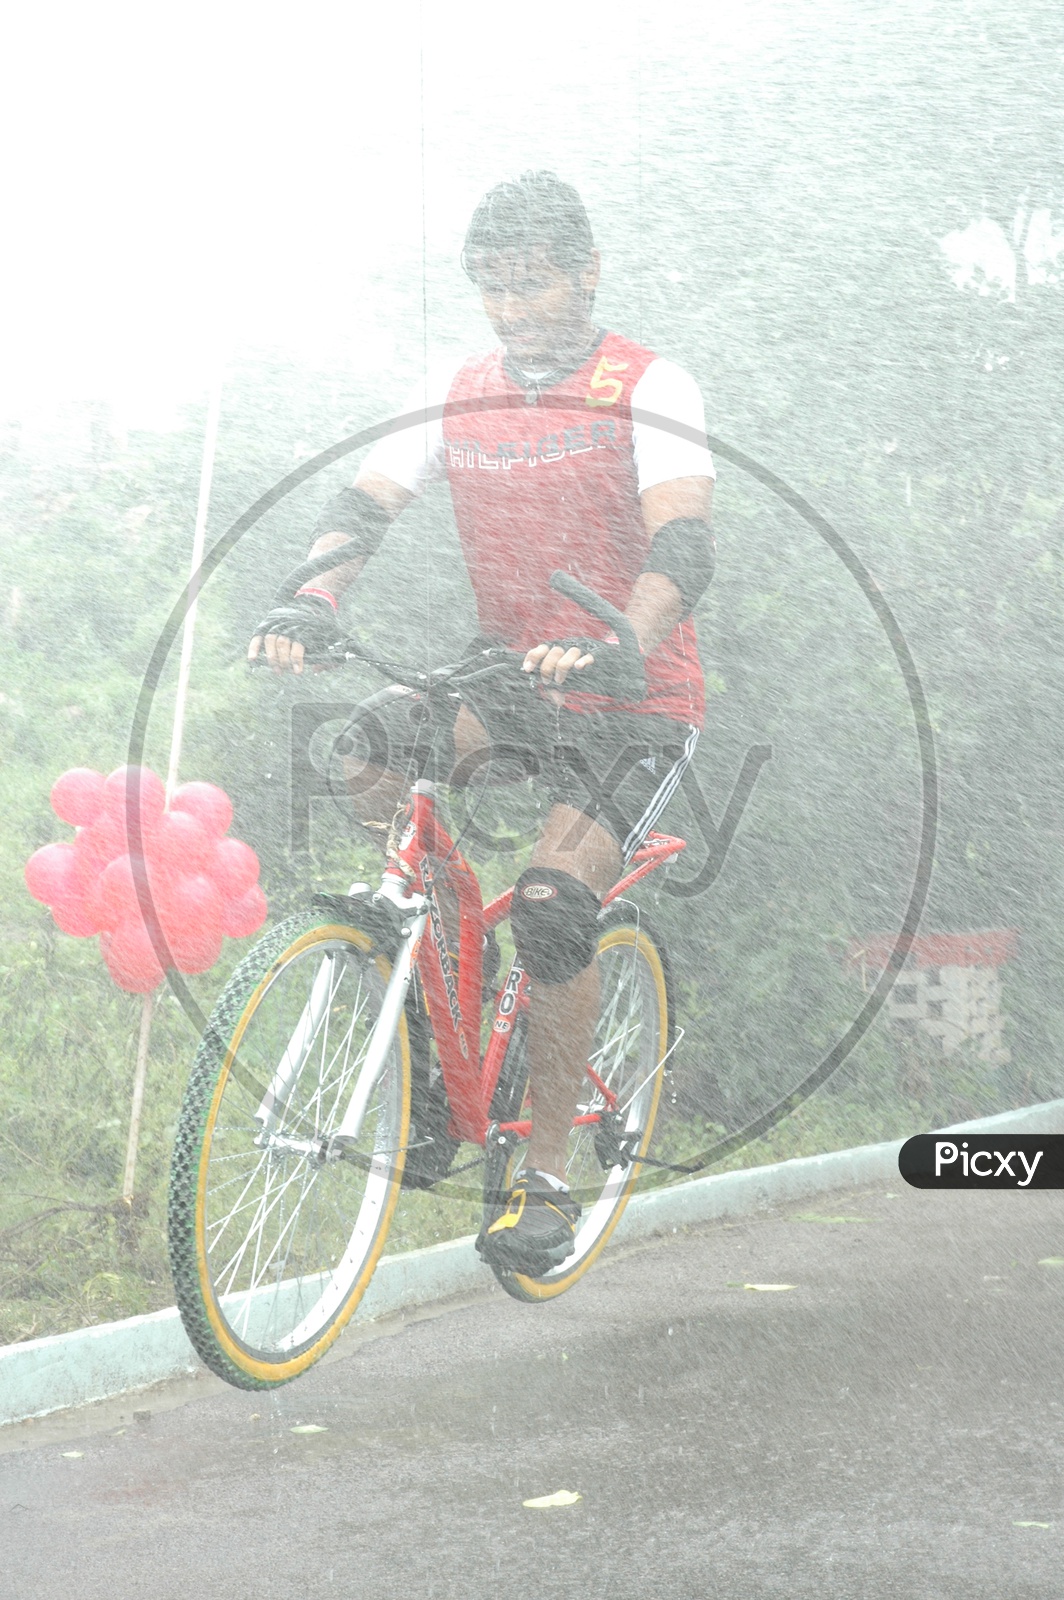 Road Bicycle Racing and Water Splashing on Cycle